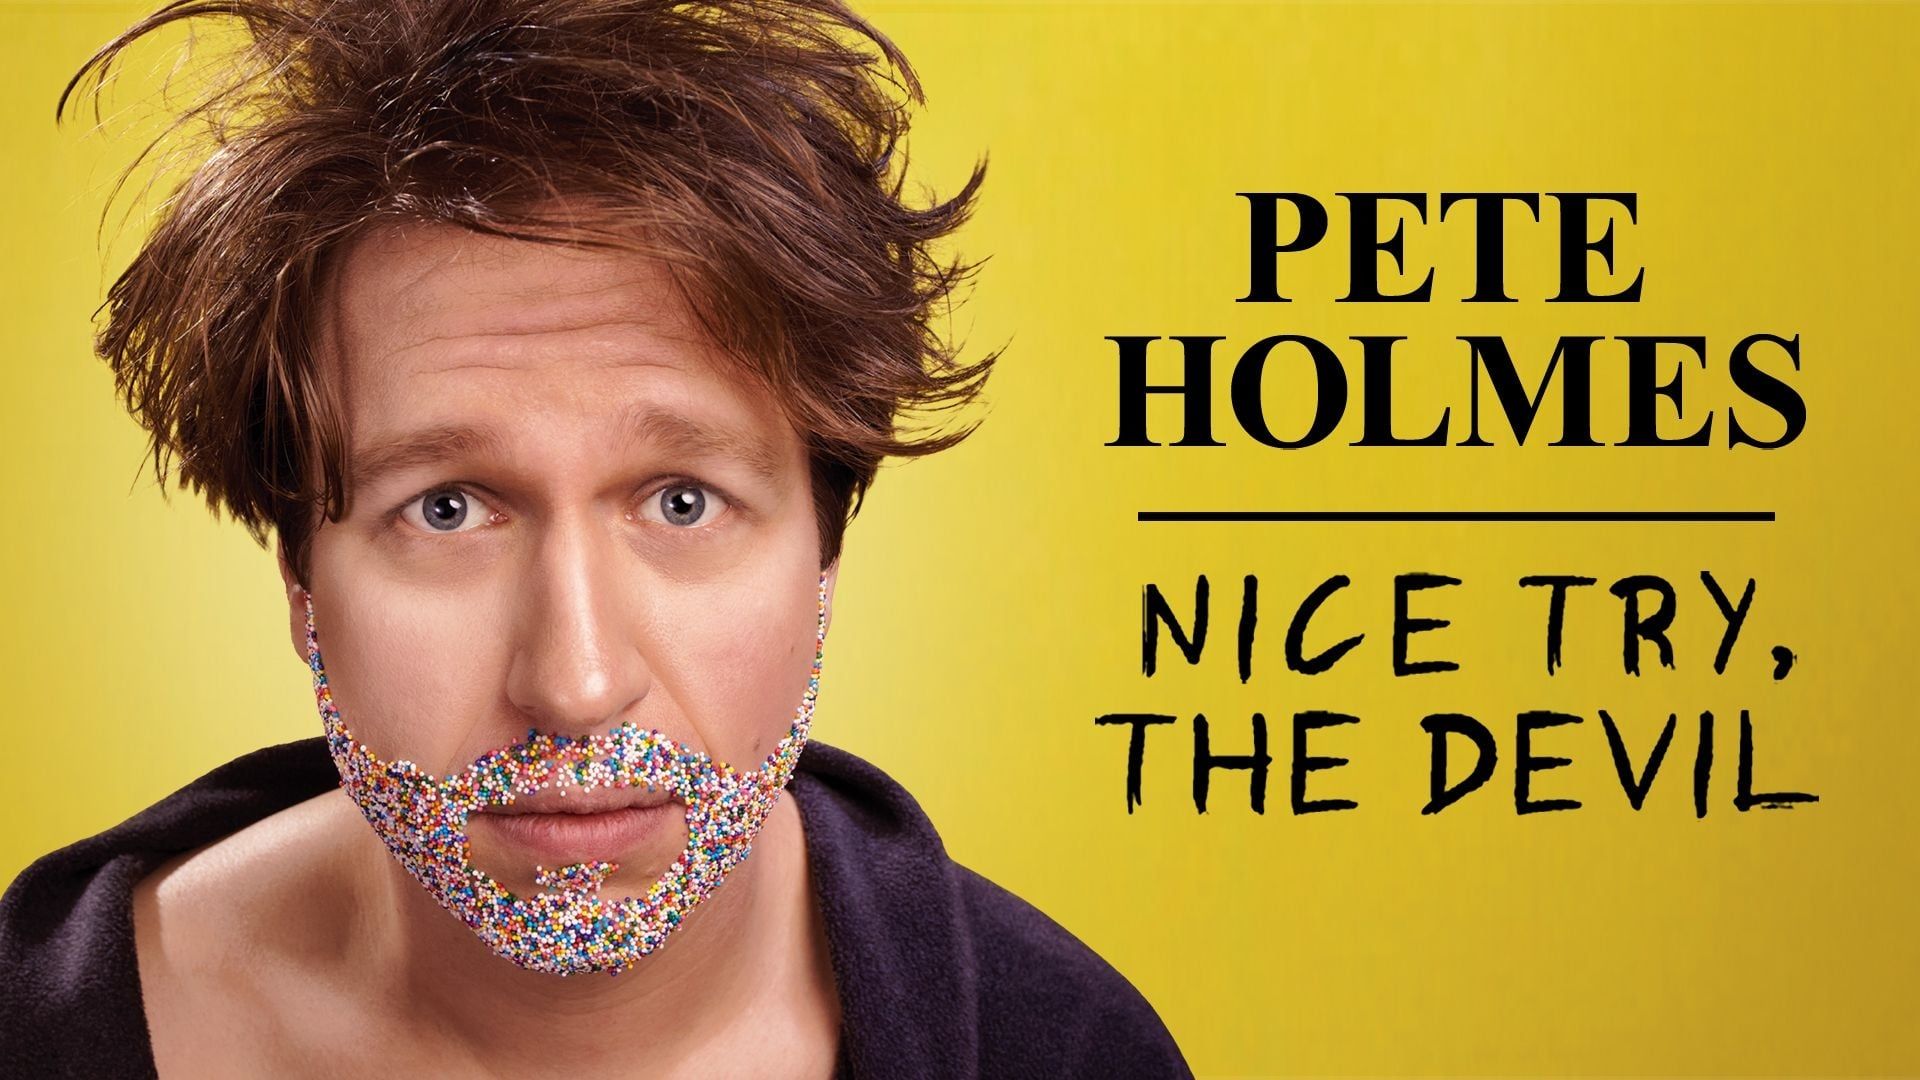 Pete Holmes: Nice Try, the Devil! background